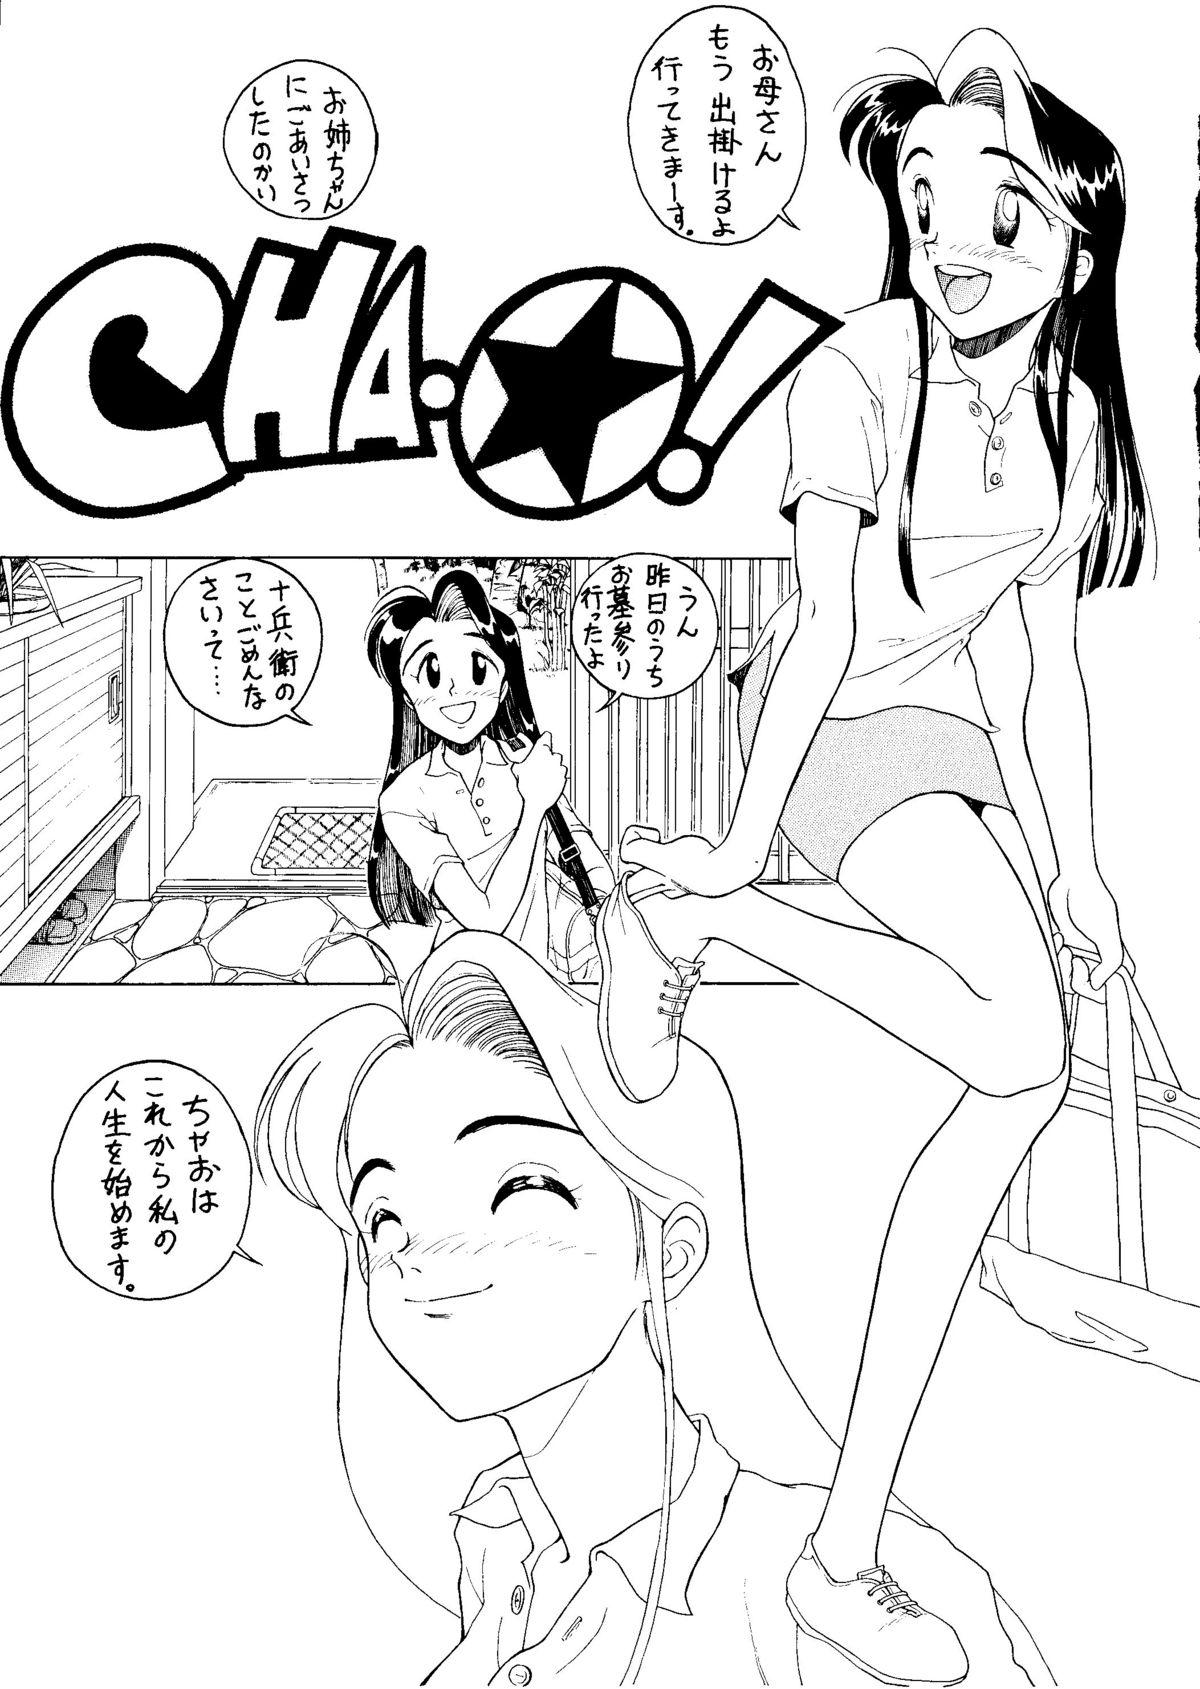 Ffm NONTA Chao! Uptown Boys Swallowing - Page 4